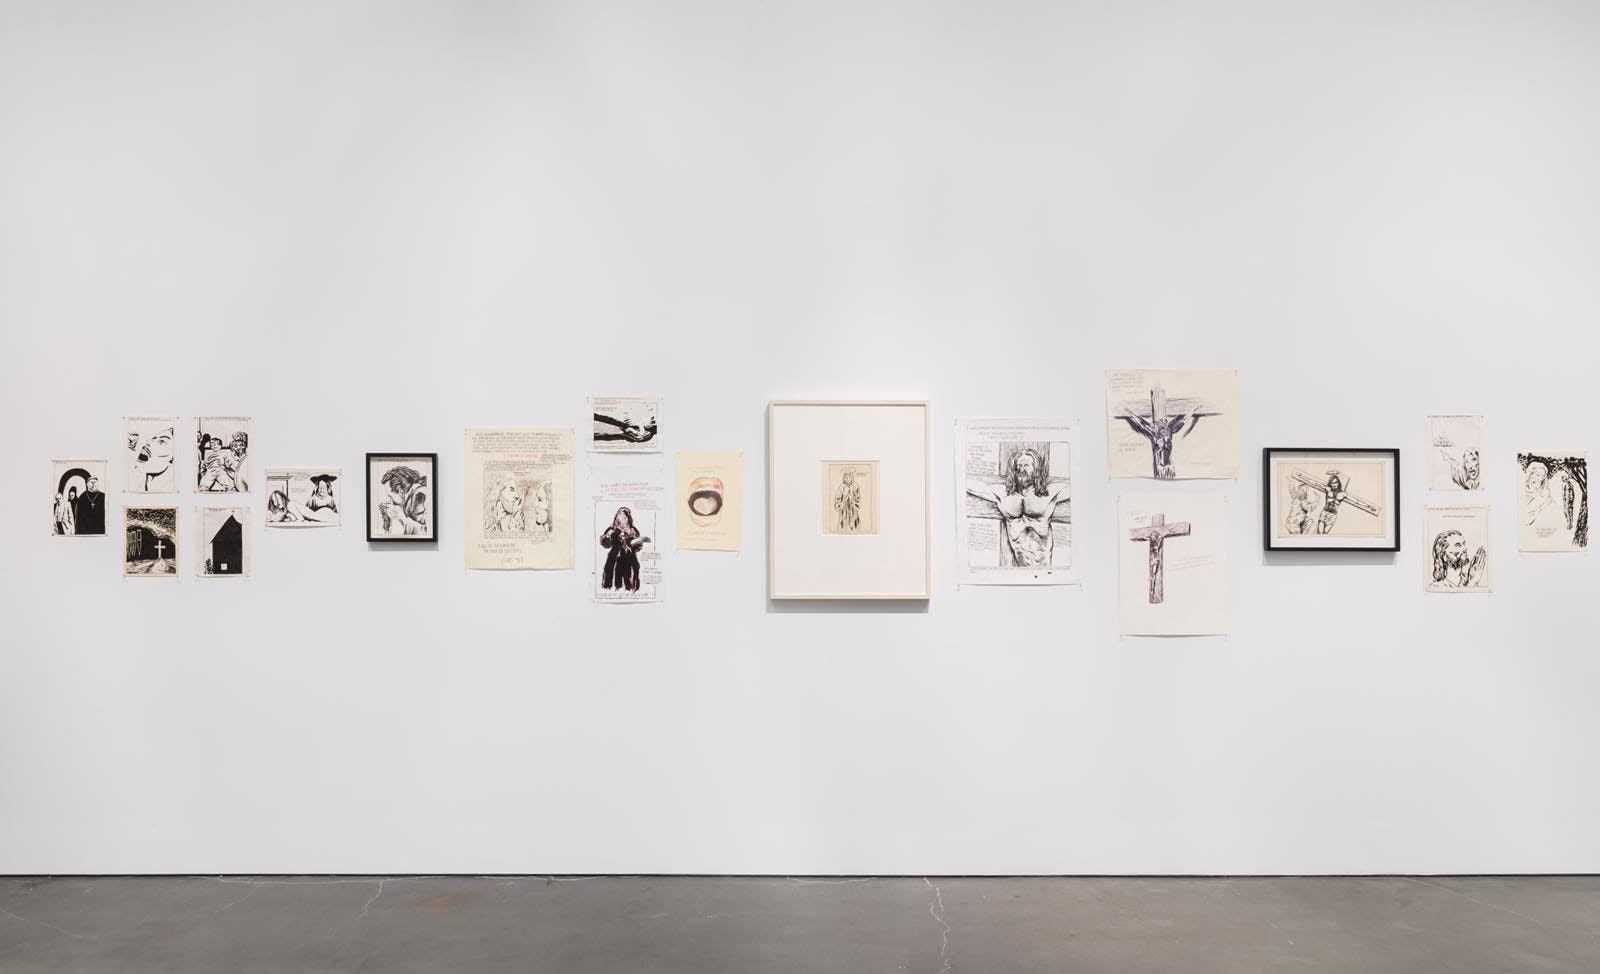 Installation view of¬†the exhibition Raymond Pettibon: A Pen of All Work,¬†at the New Museum in New York, dated 2017.